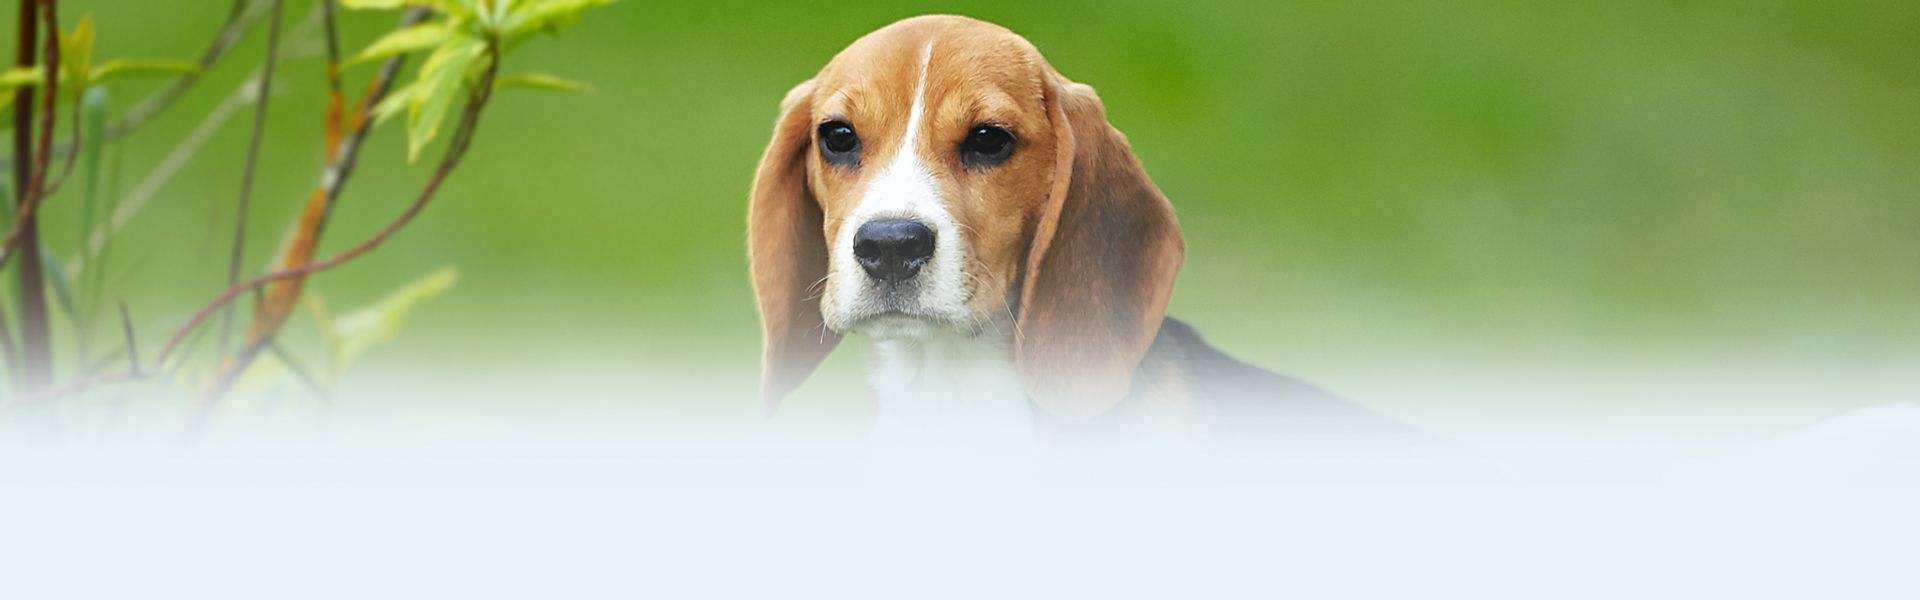 cute beagle dog with a green blurry background